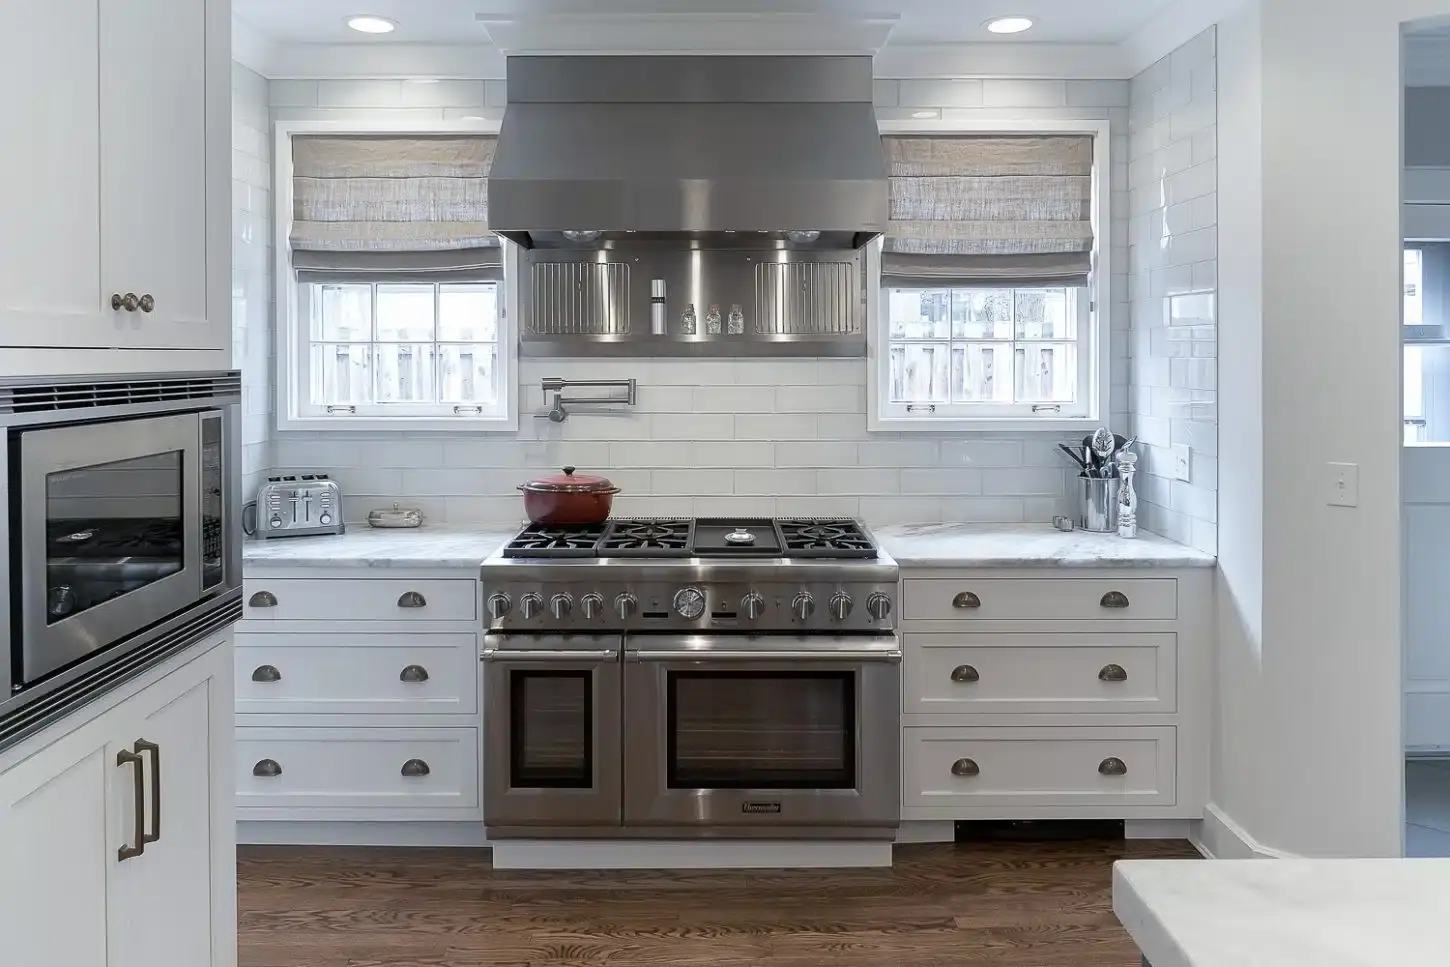 Chagrin-River-Company-Kitchen-Remodel-Thermador-Stove-Large-Hood-Shaker-Heights-Ohio